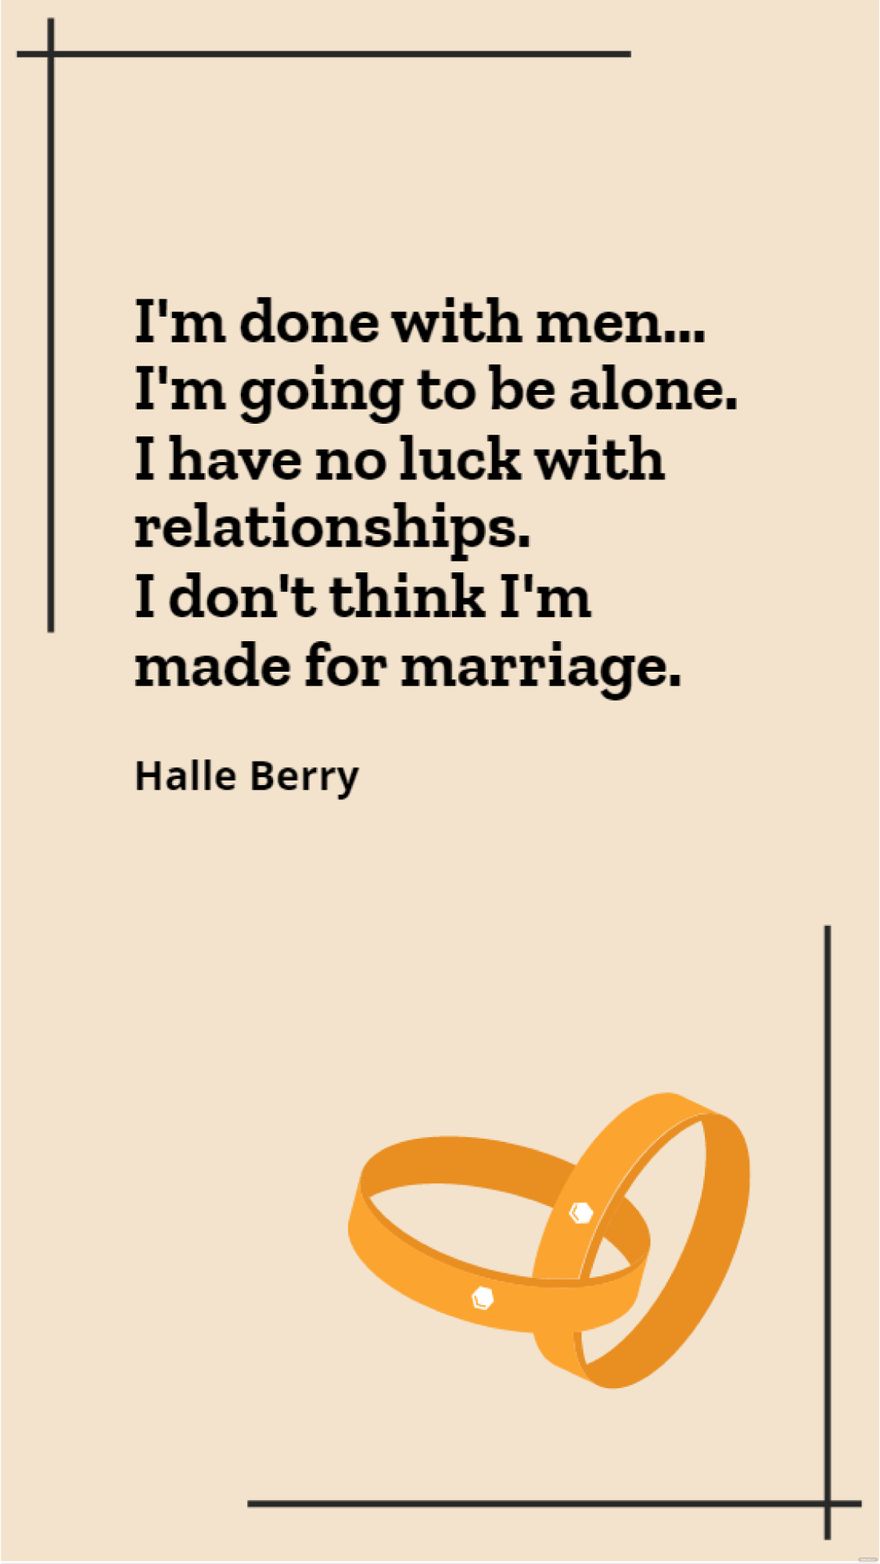 Halle Berry - I'm done with men... I'm going to be alone. I have no luck with relationships. I don't think I'm made for marriage.